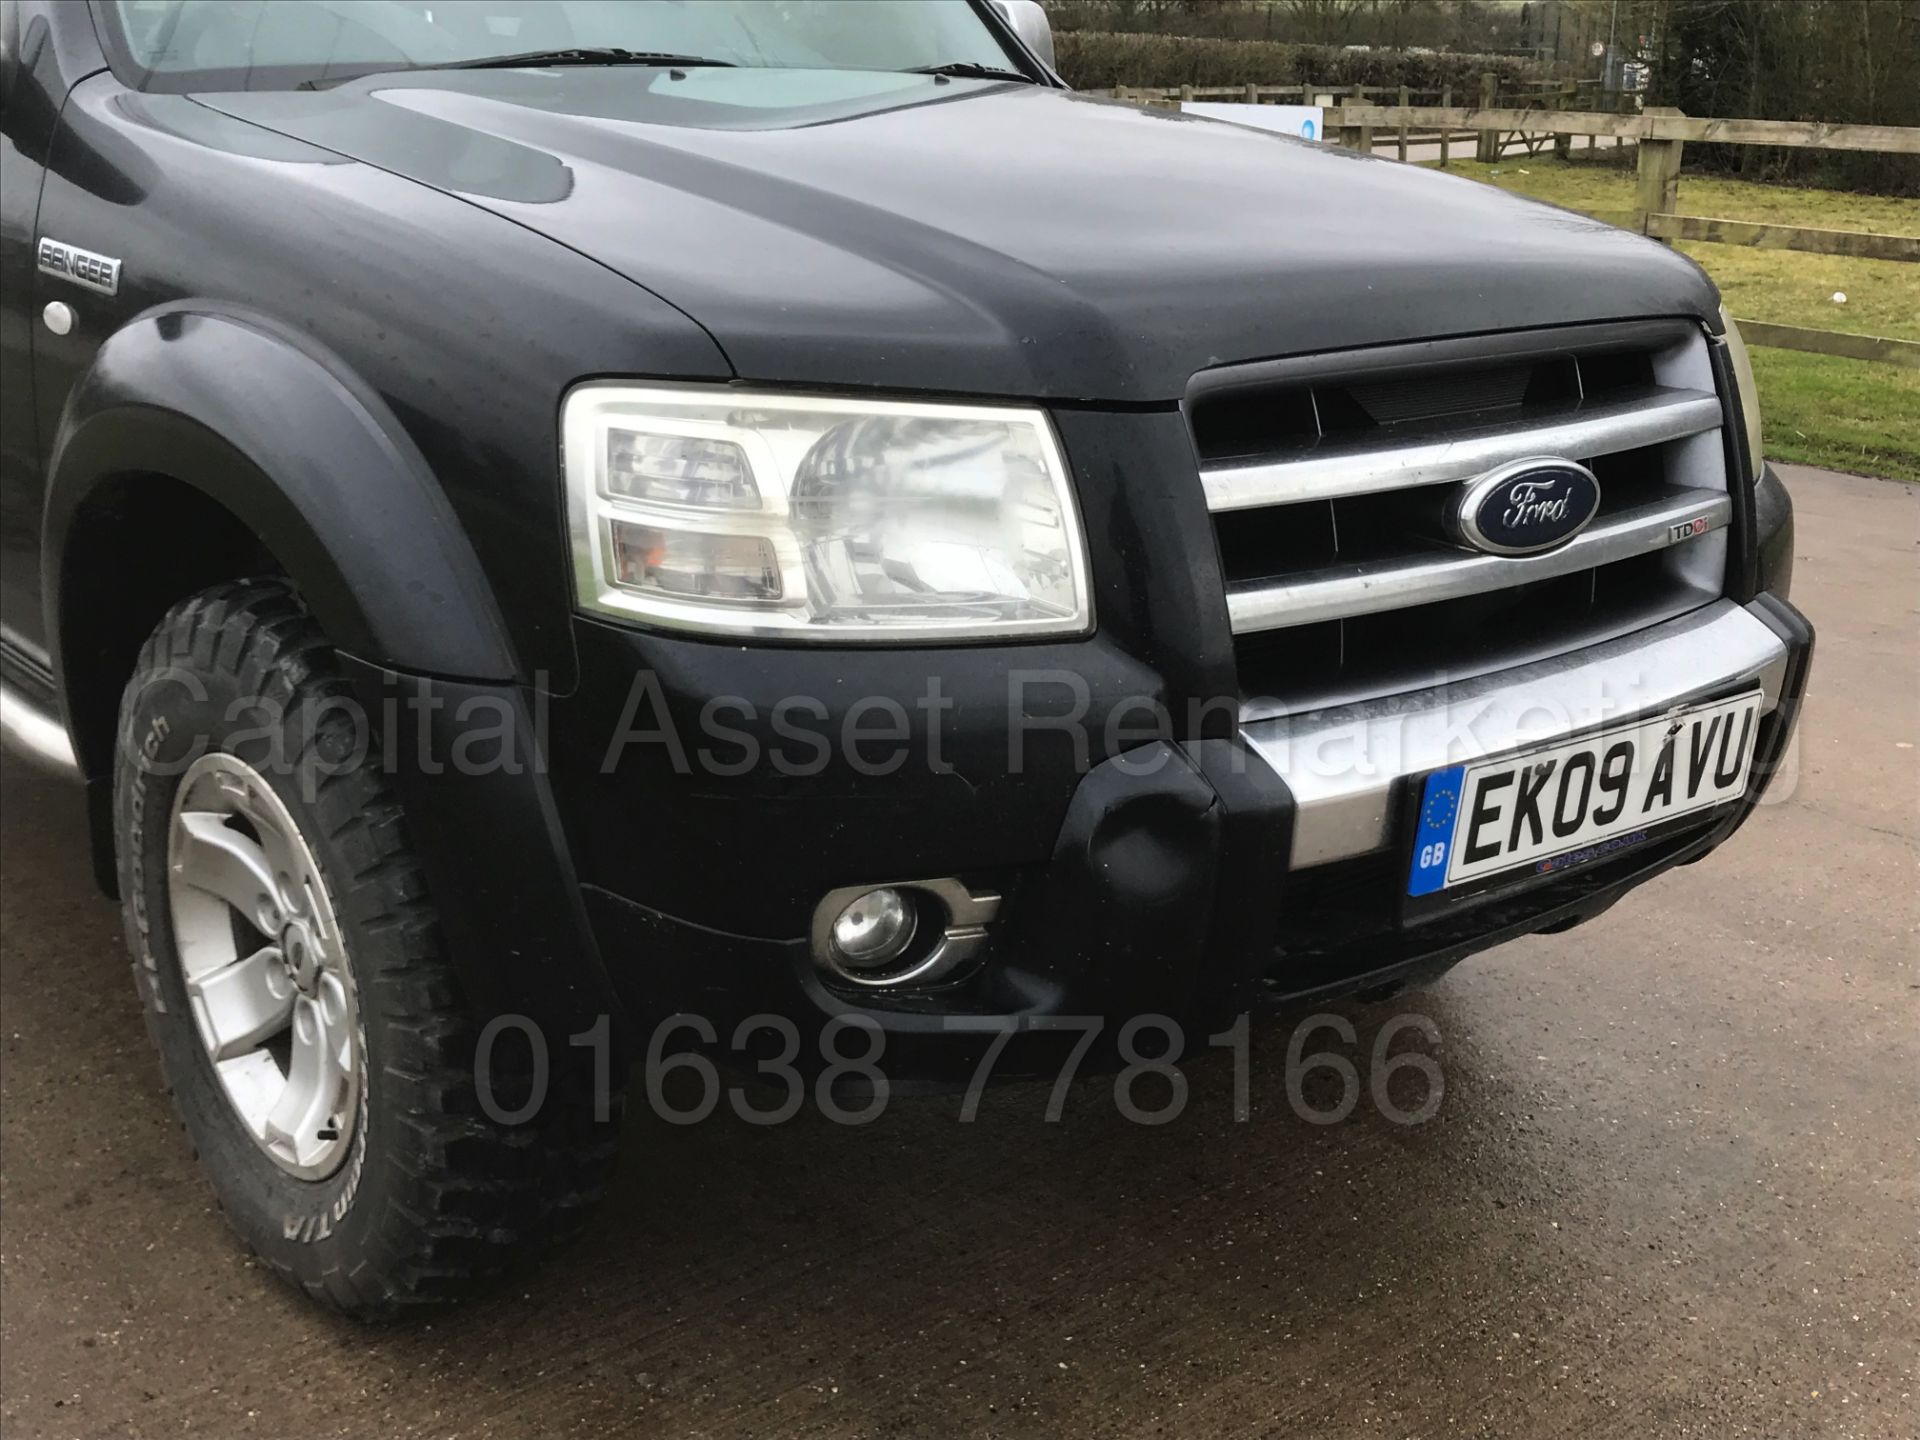 FORD RANGER 'THUNDER' DOUBLE CAB PICK-UP (2009 ) '2.5 TDCI - 143 BHP' *LEATHER - AIR CON* (NO VAT) - Image 12 of 29